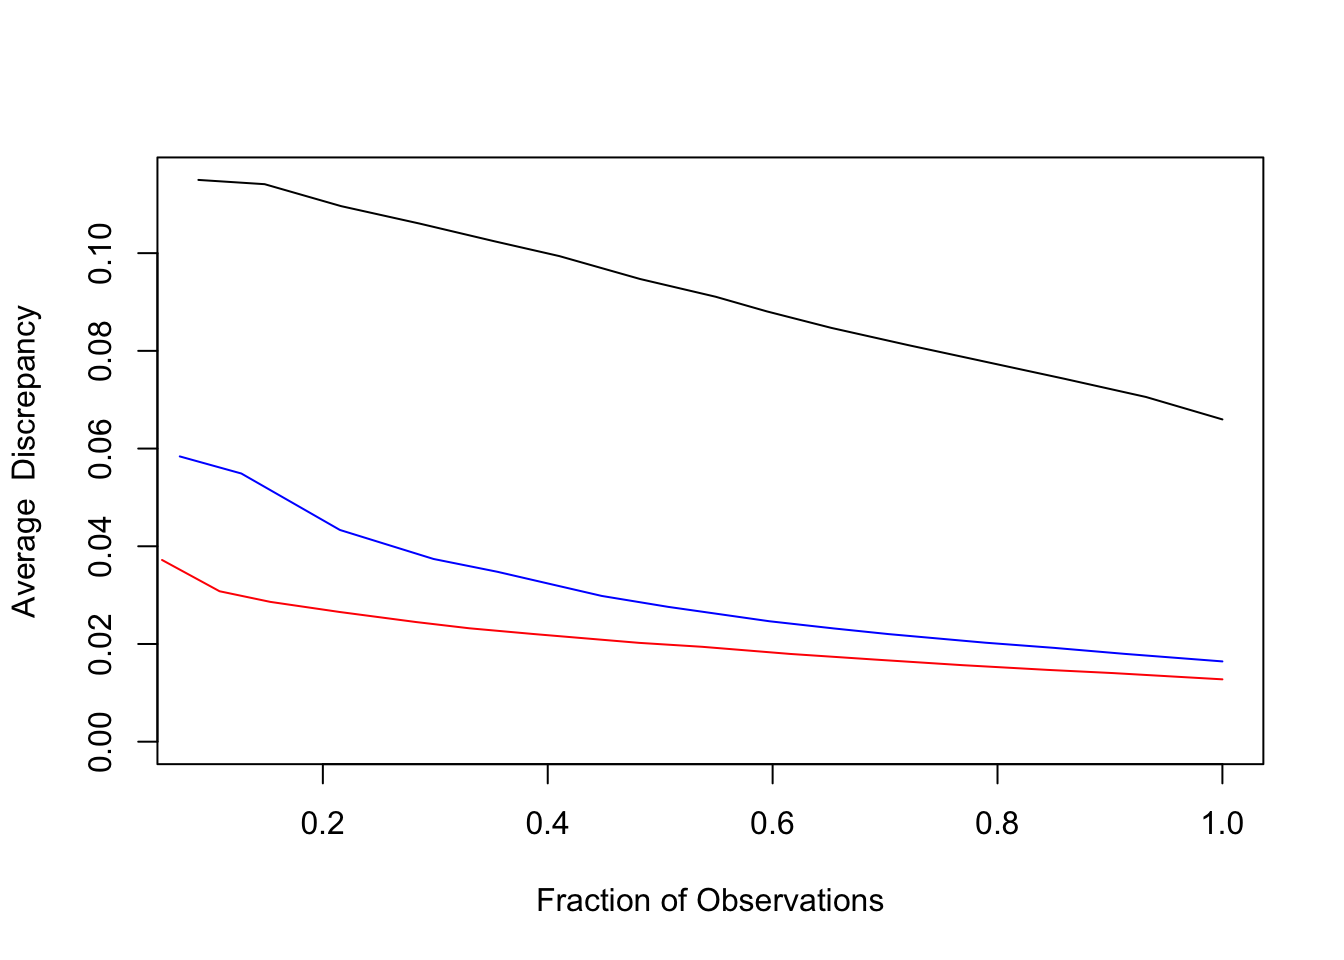 Lack-of-fit contrast curves for GBL (black), RF (blue), and GBP (red) for census income data.